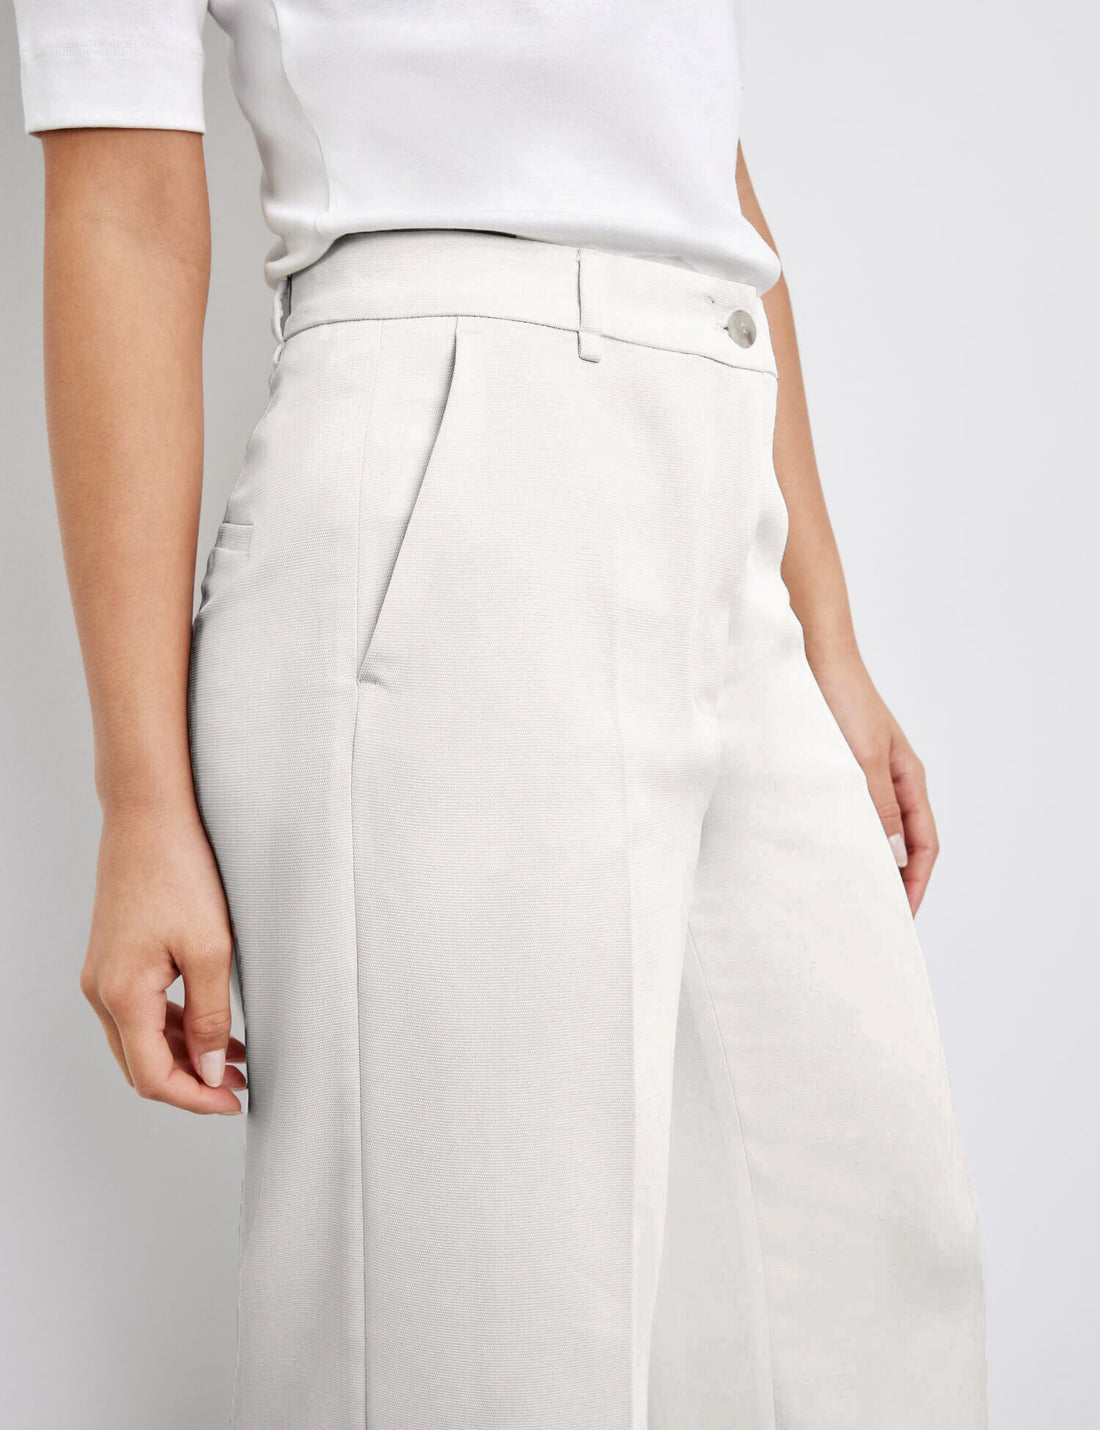 Flowing Trousers With Pressed Pleats_320025-31278_99700_02